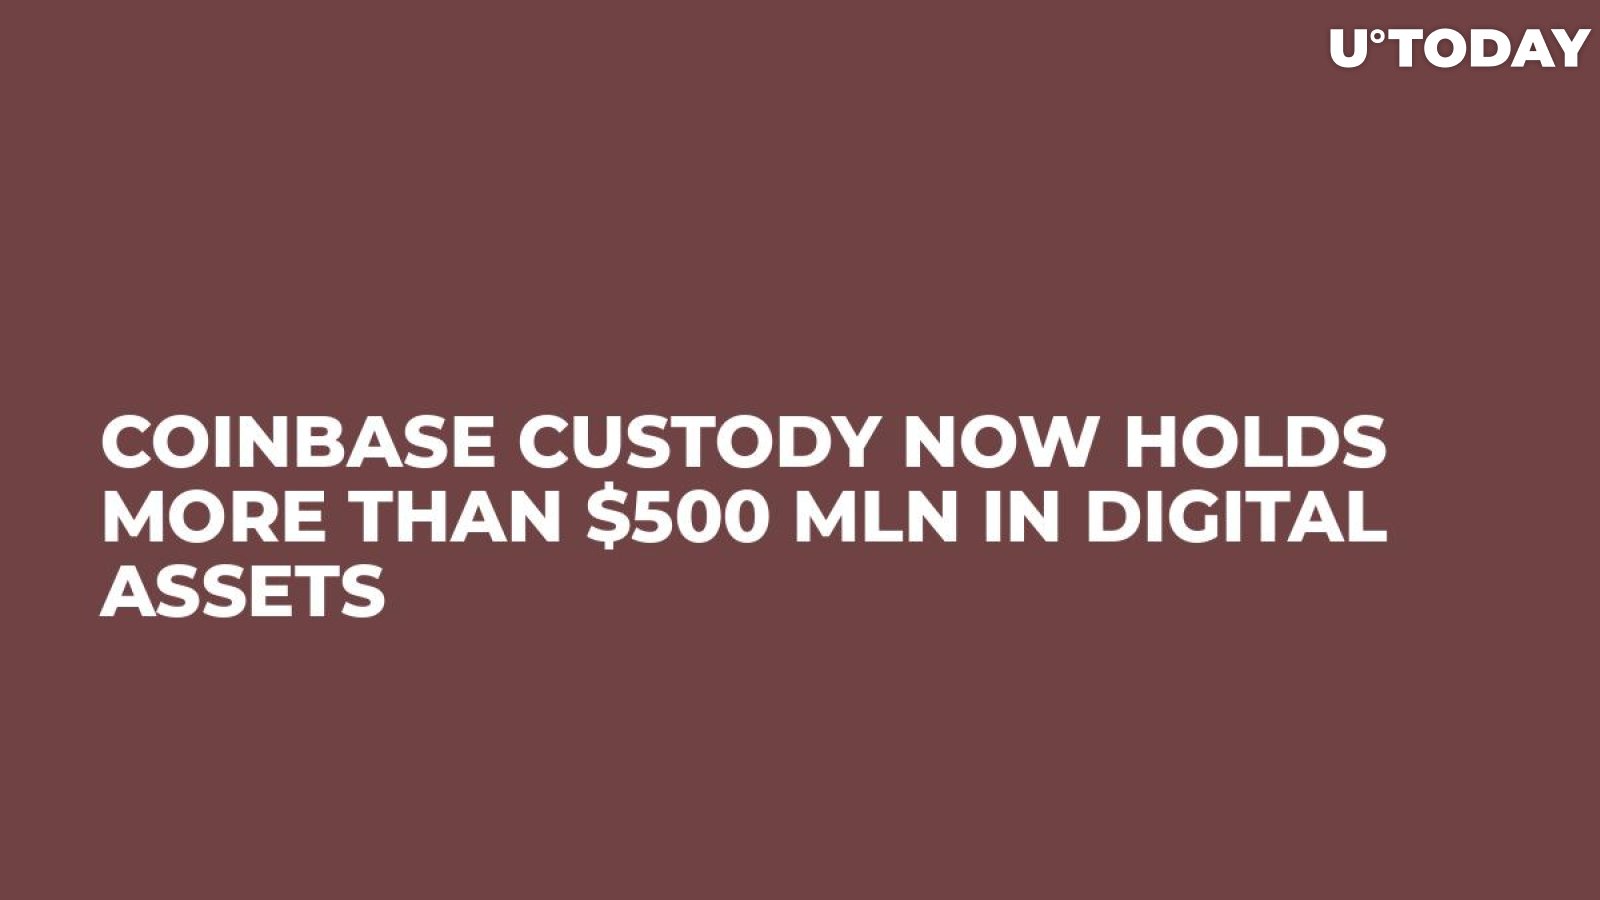 Coinbase Custody Now Holds More Than $500 Mln in Digital Assets